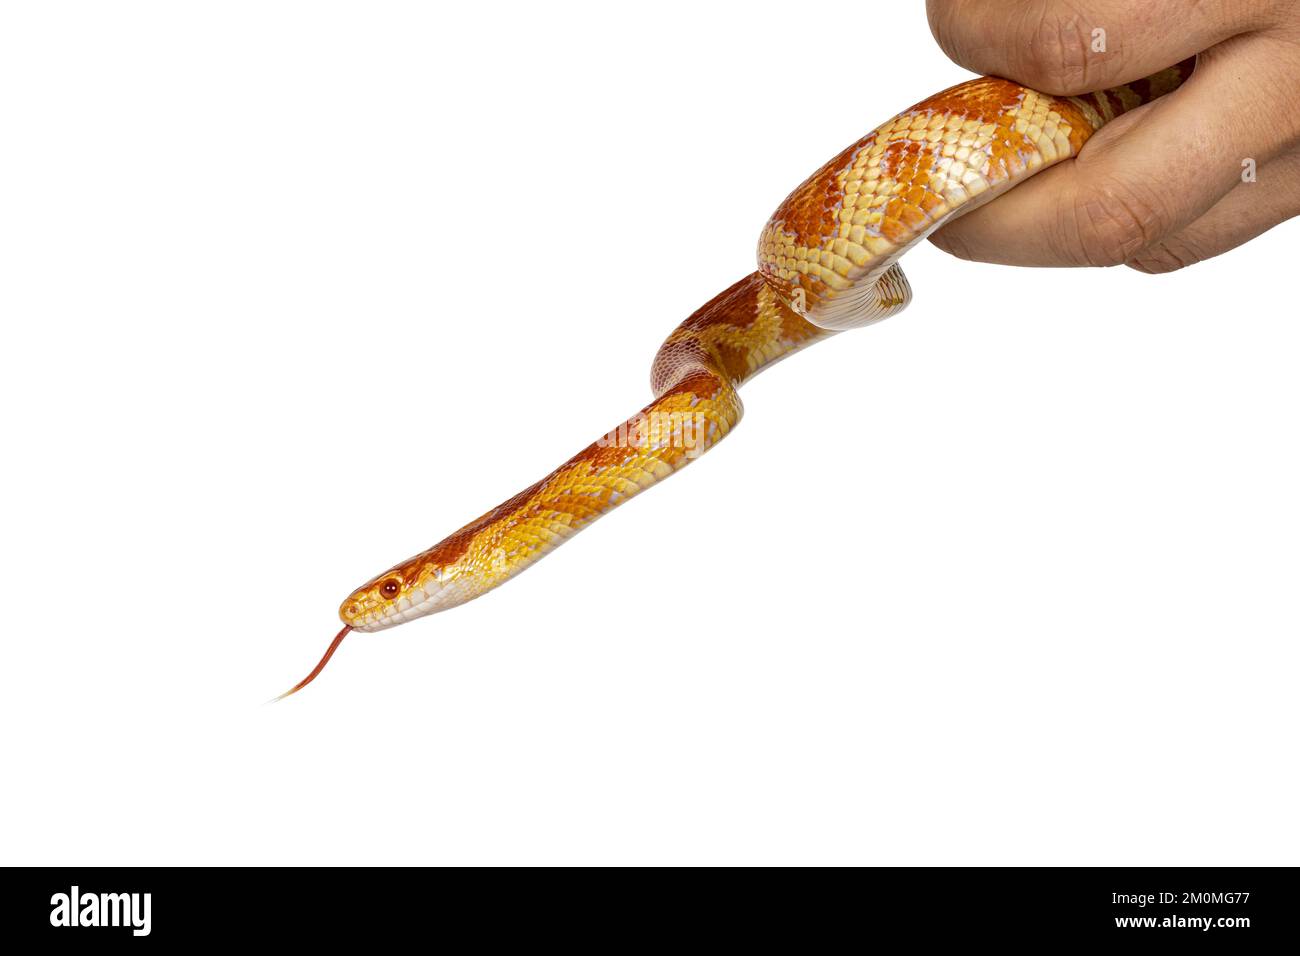 Head shot of Candy Cane morph Corn Snake aka Red rat snake or  Pantherophis guttatus. Being handled in hand. Isolated on a white background. Stock Photo